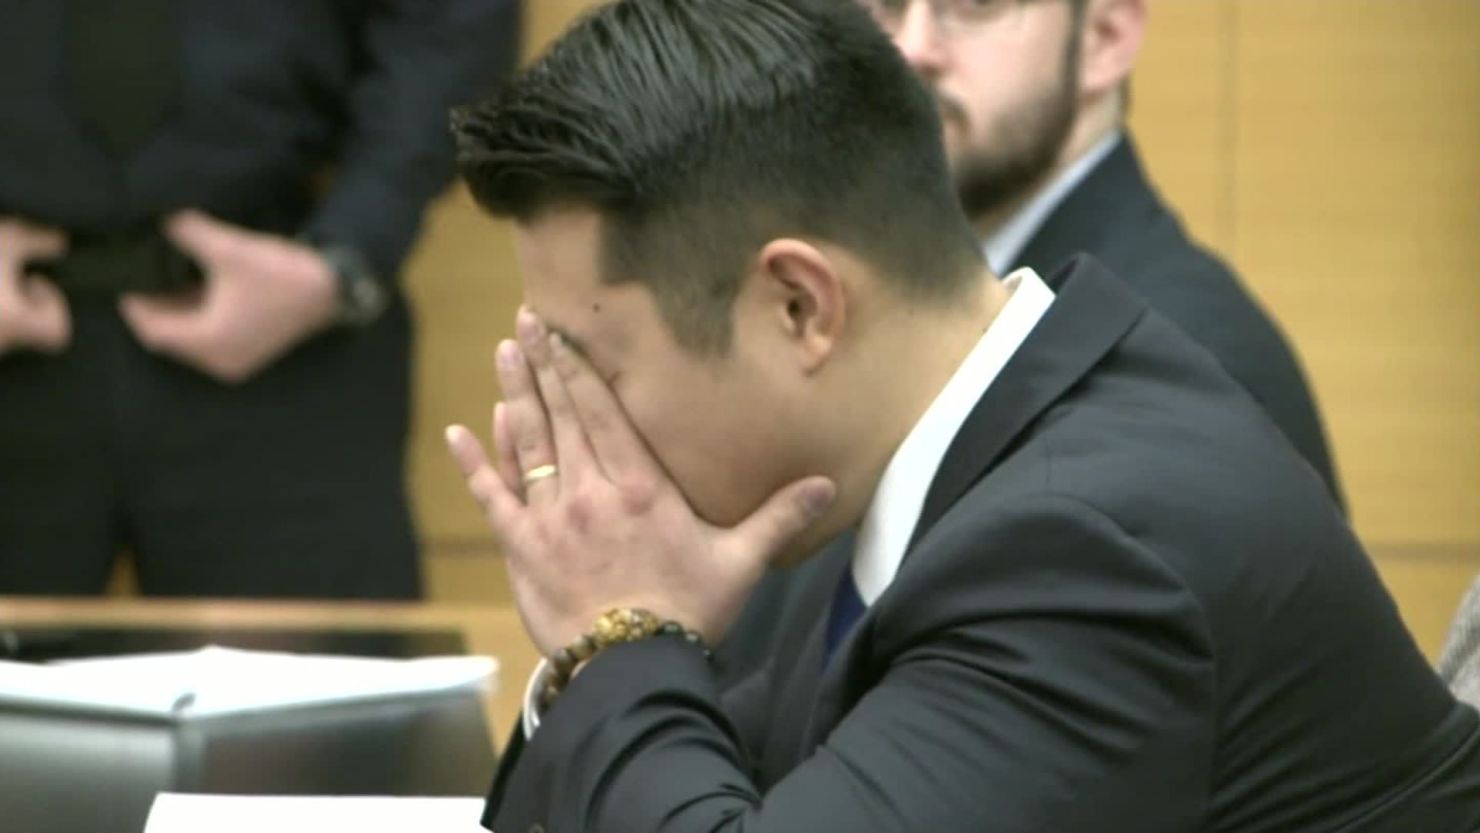 Former NYPD Officer Peter Liang listens as the verdict is read at his trial in February.